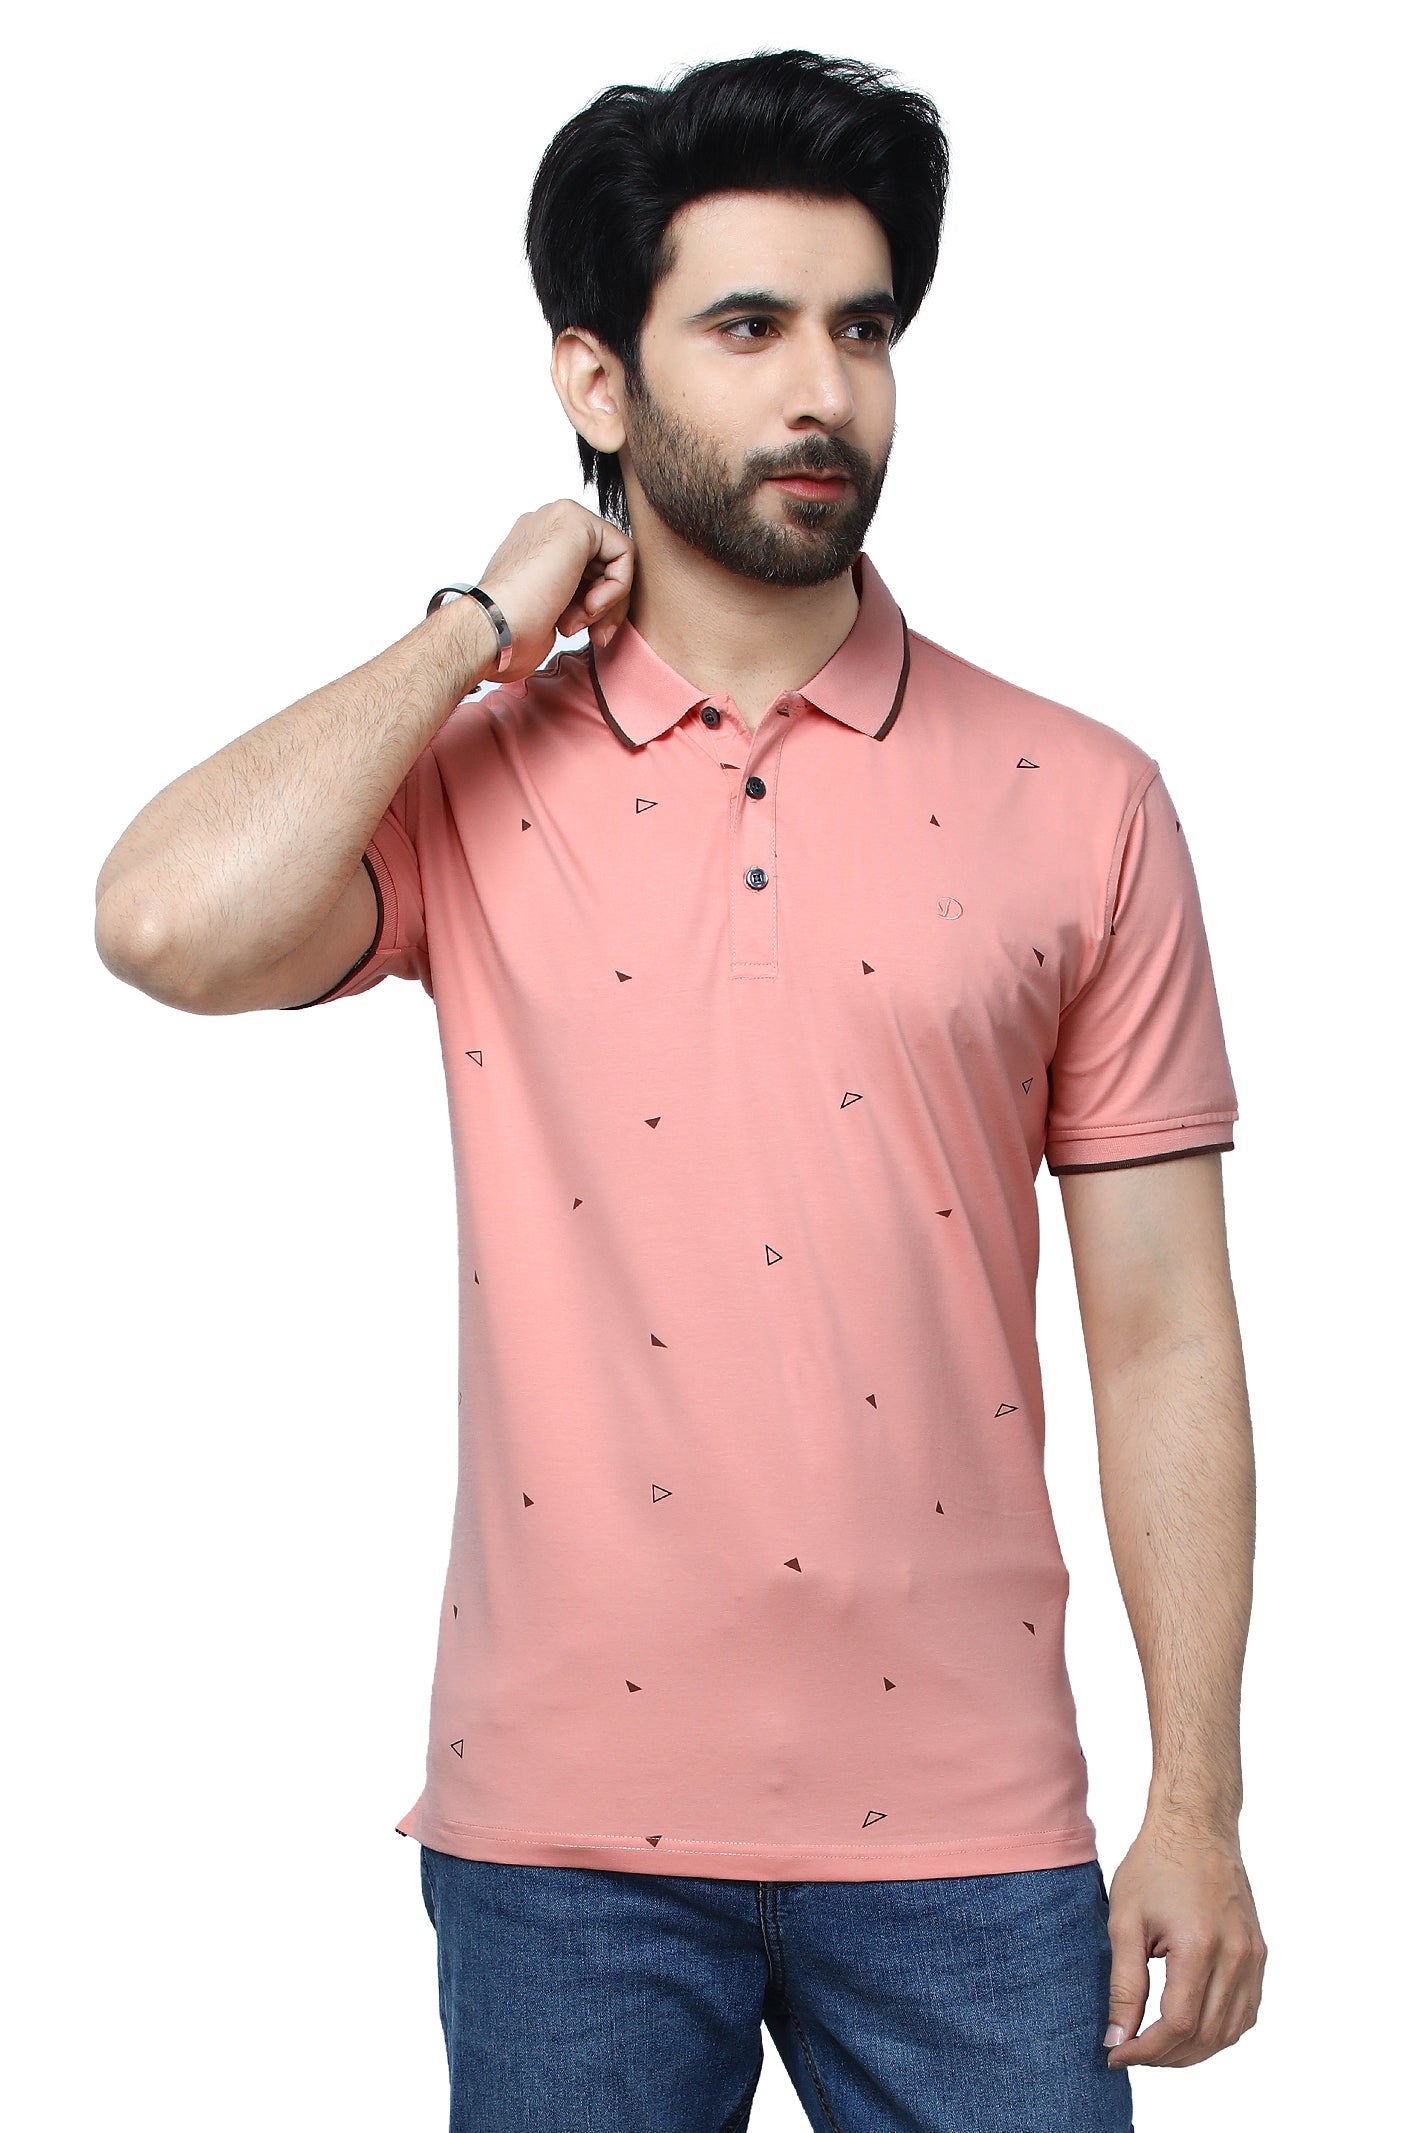 Diners Men's Polo T-Shirt SKU: NA889-PEACH - Diners